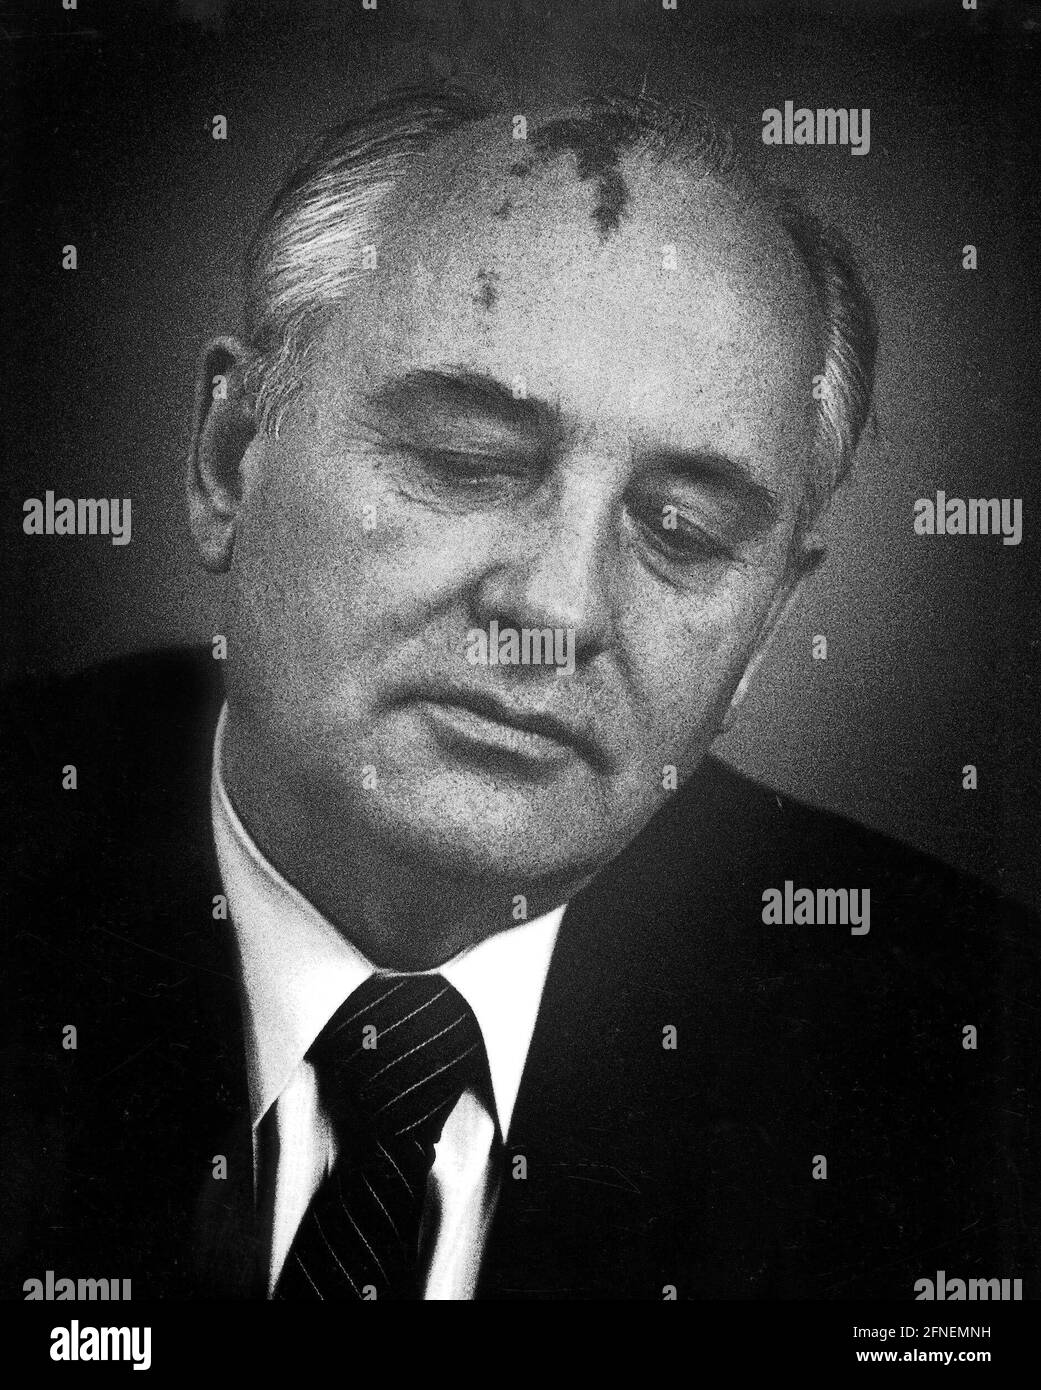 Mikhail S. Gorbachev (born 1931), Russian politician, he received the Nobel Peace Prize in 1990. [automated translation] Stock Photo